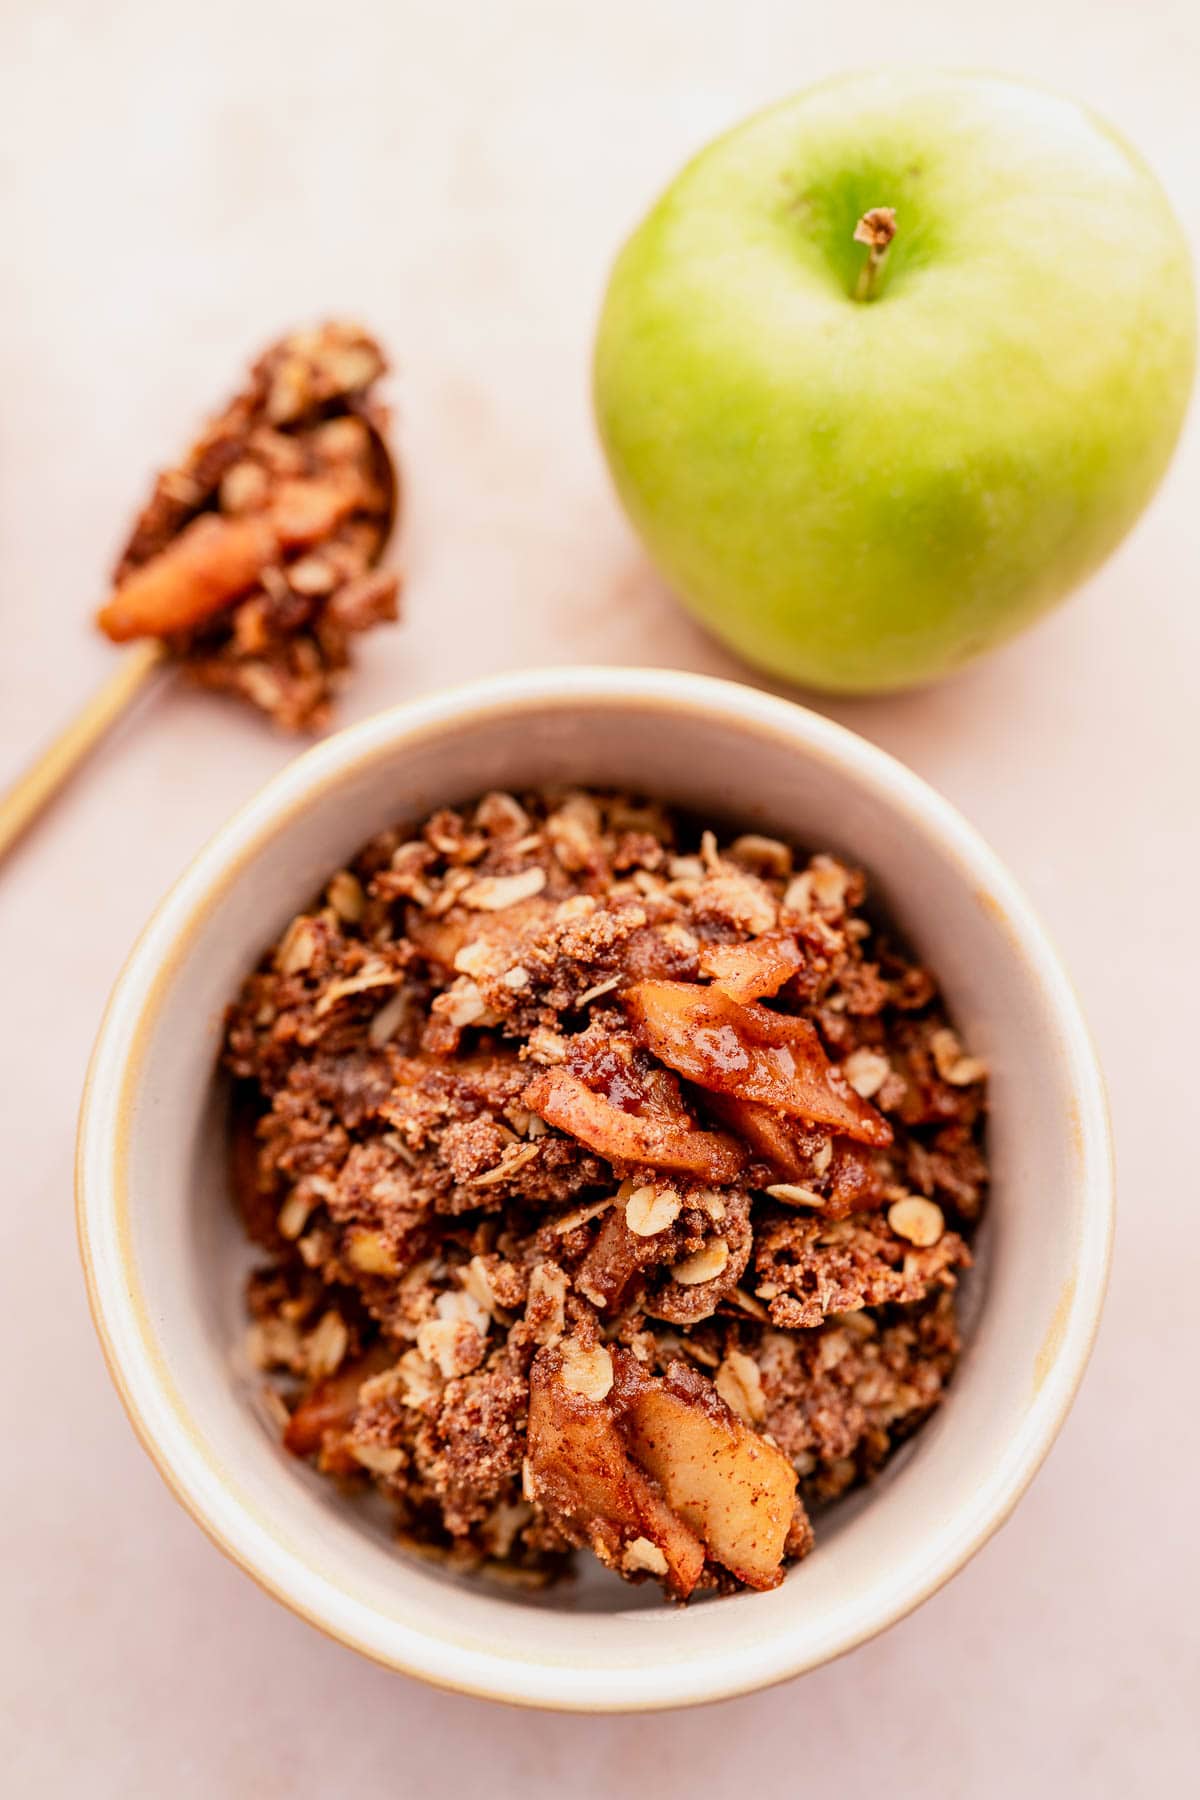 A gluten-free bowl of granola with fresh apples and a spoon.